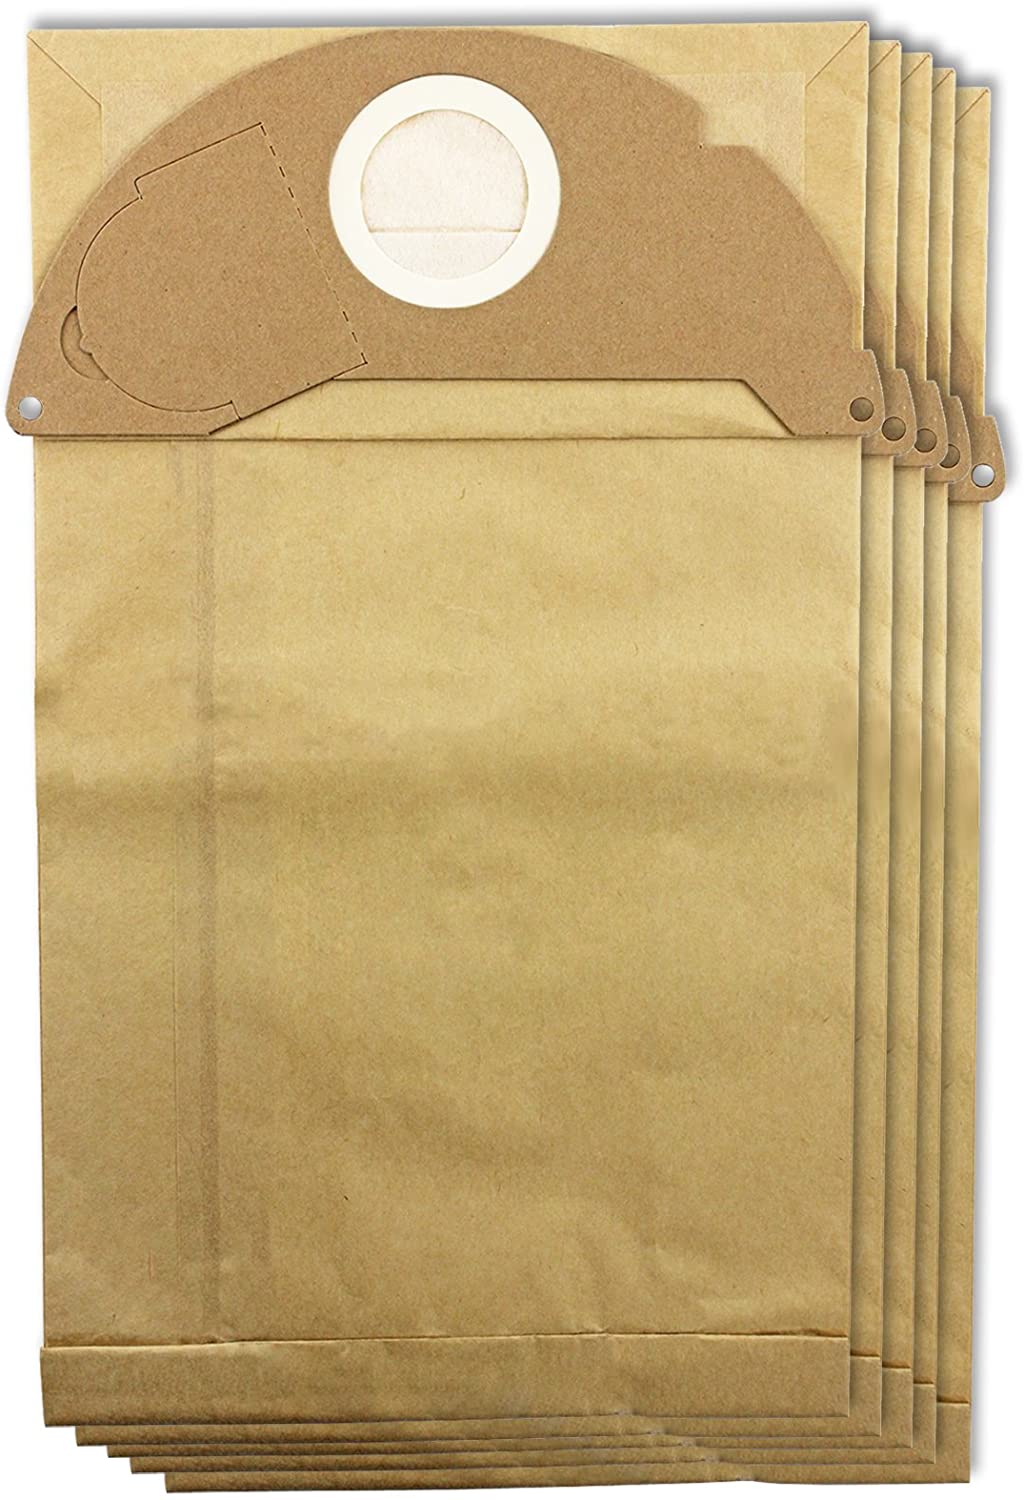 Strong Dust Bags for Karcher Vacuum Cleaners (Pack of 5)